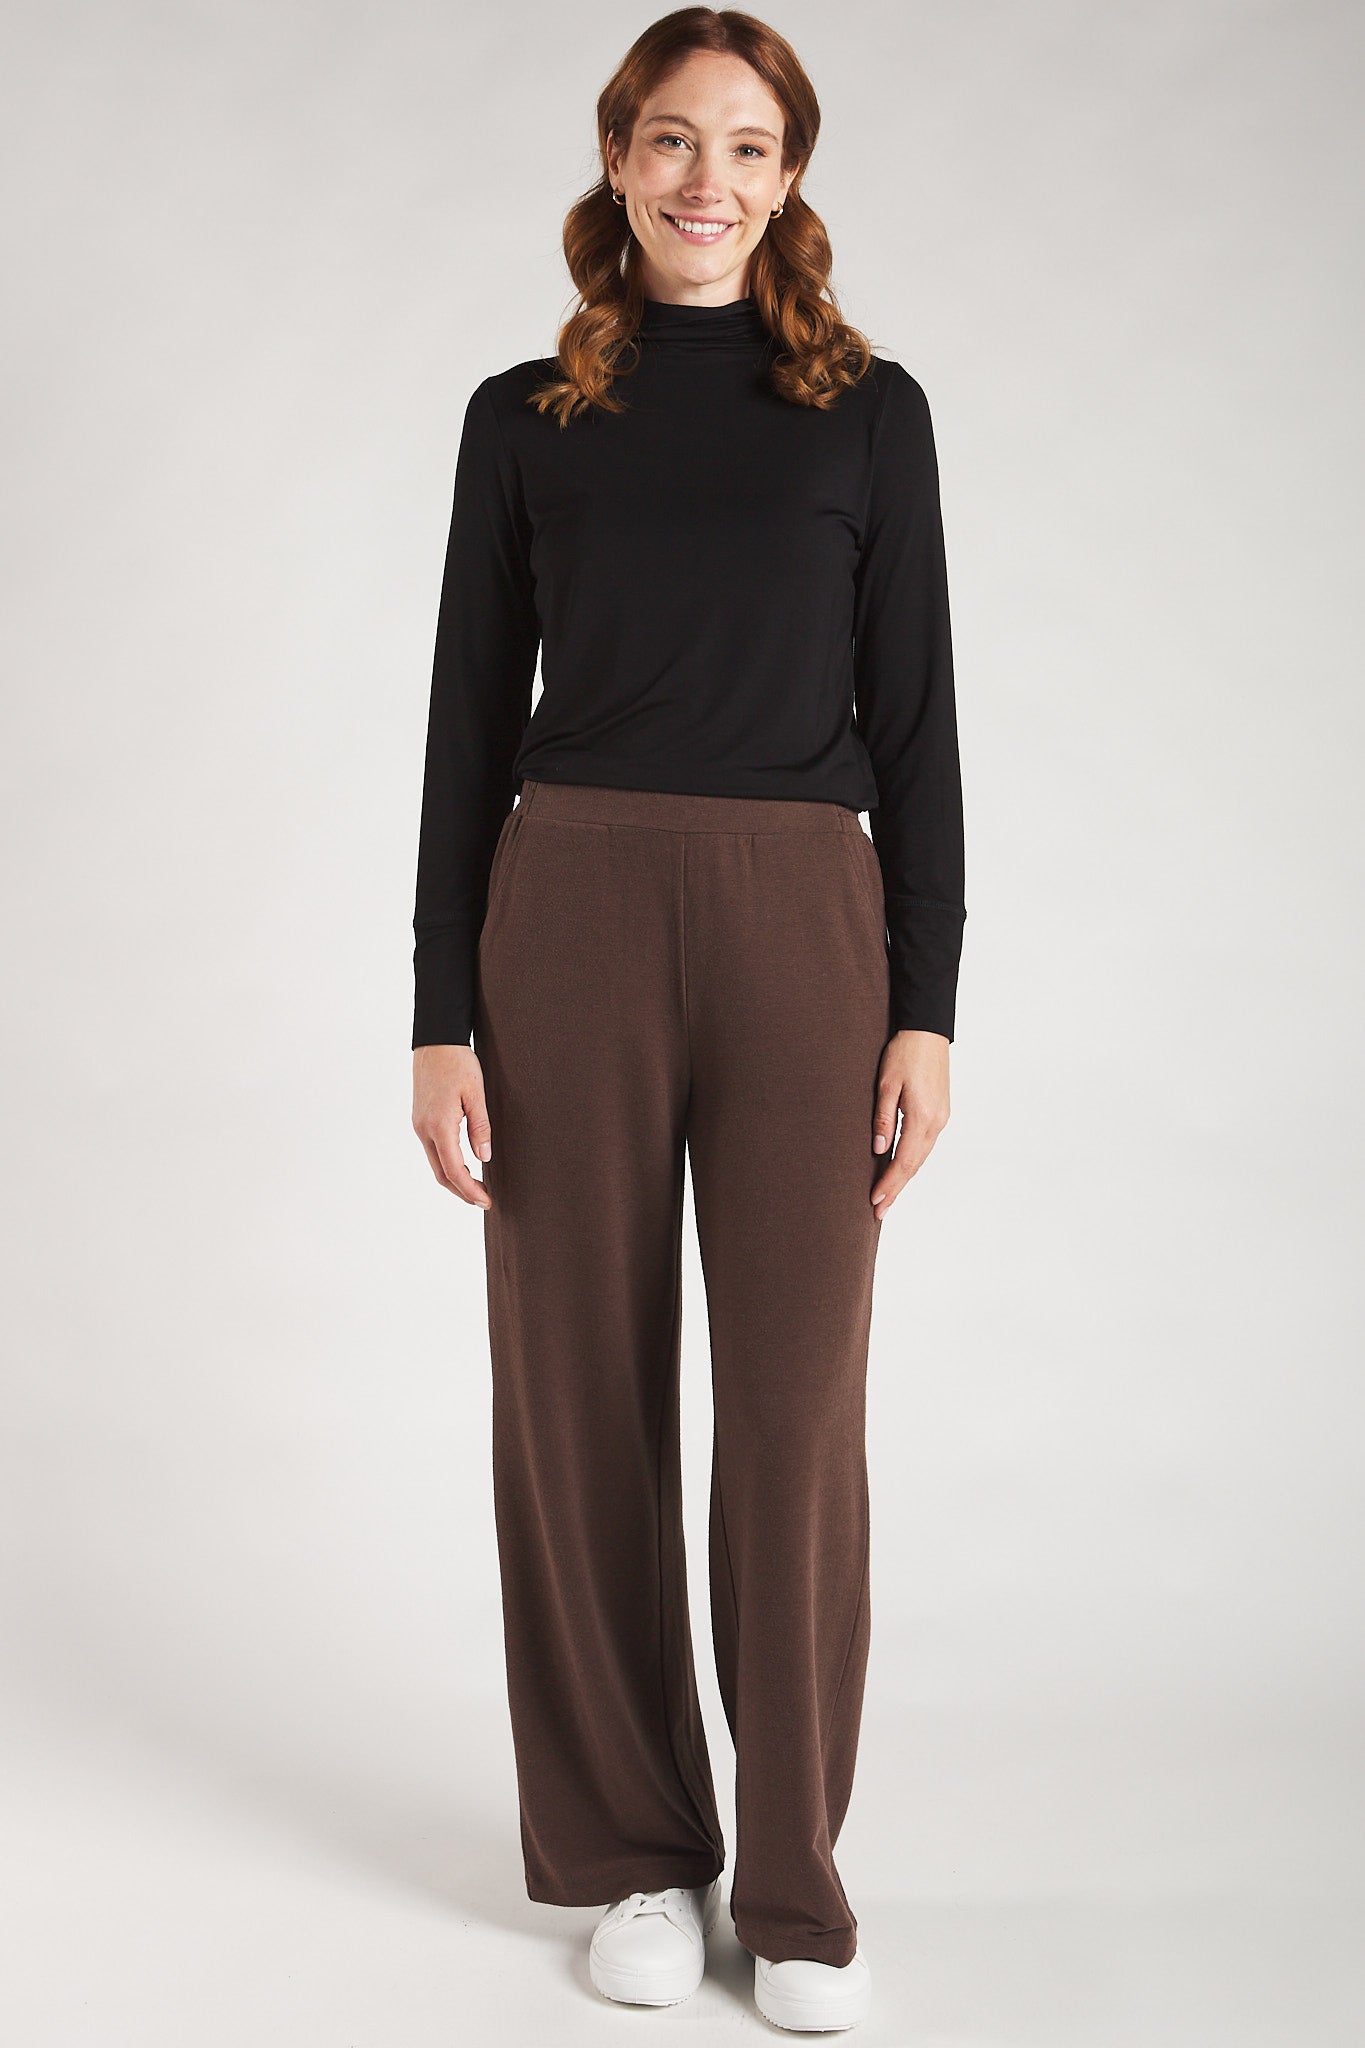 Woman styling a black long sleeve turtleneck top with brown straight leg pants from Terrera.